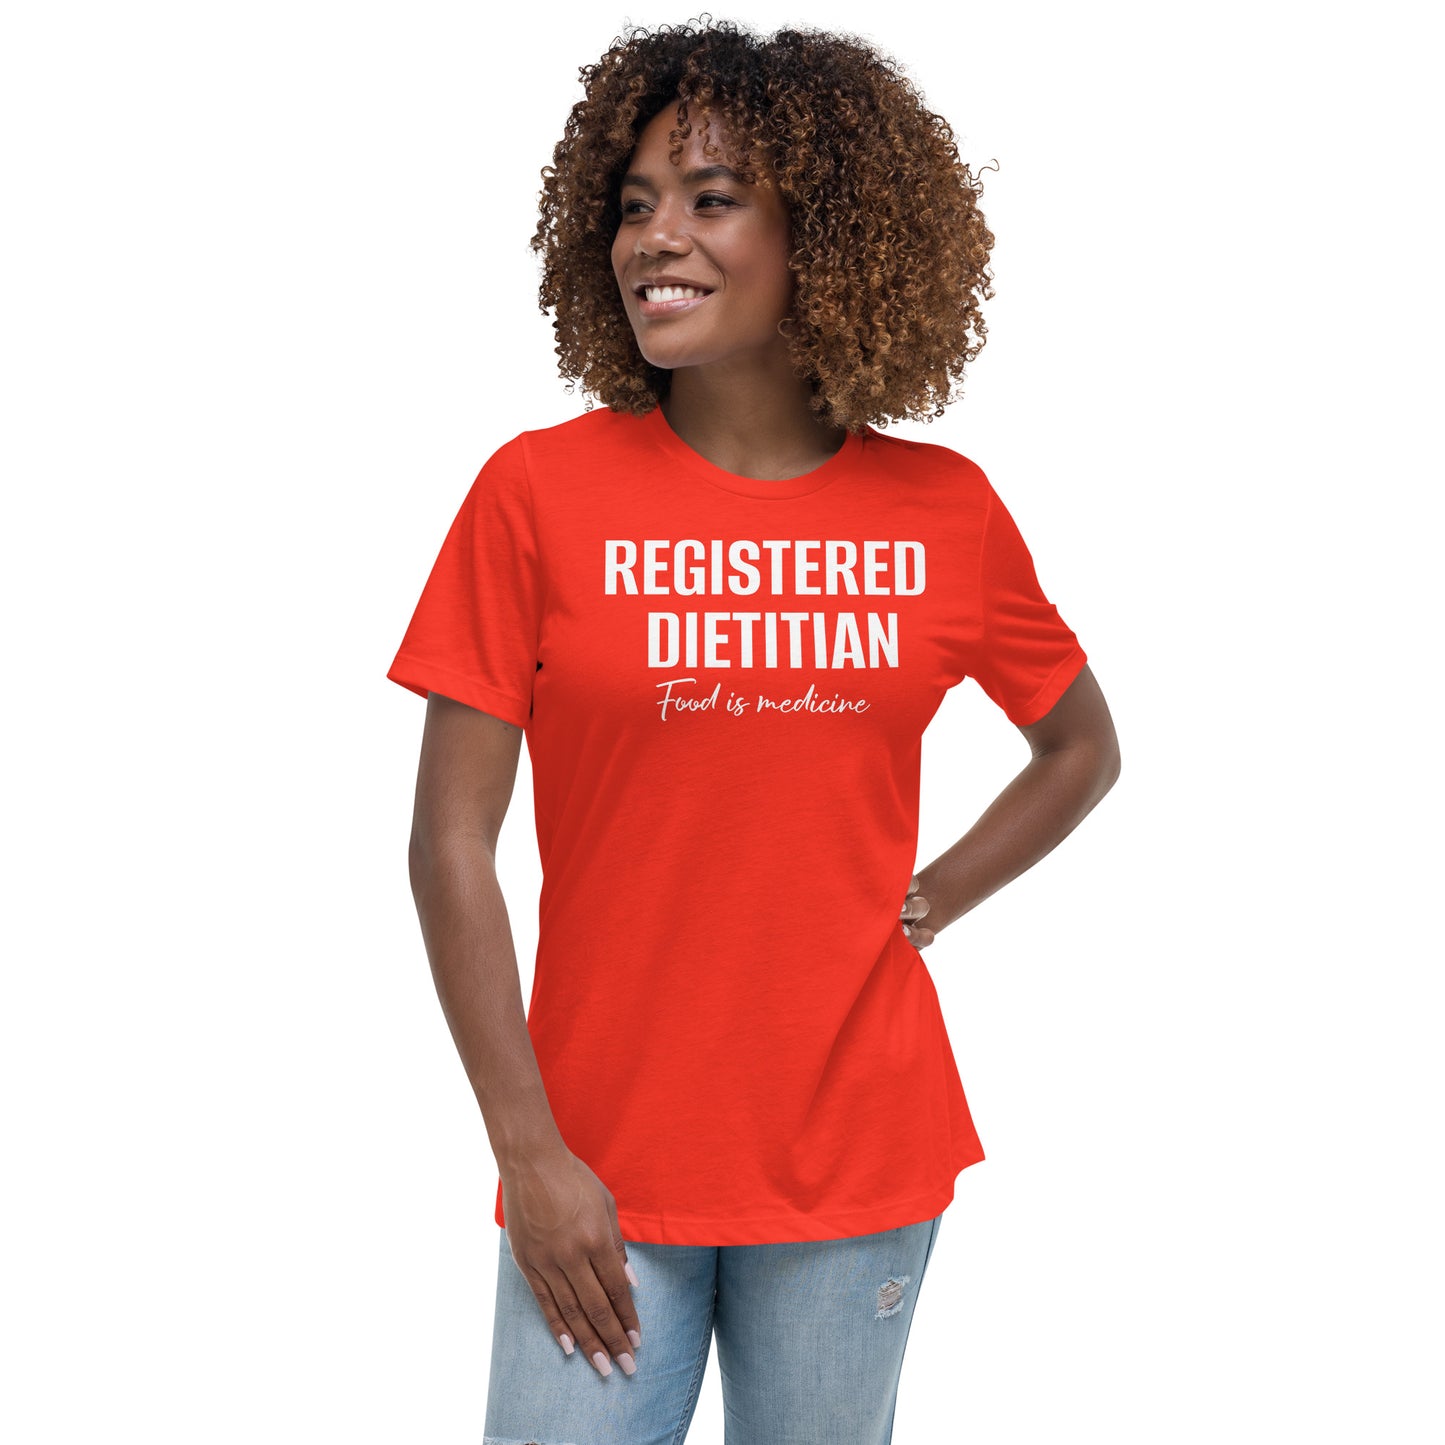 Registered Dietitian/Food is medicine - Women's Relaxed T-Shirt